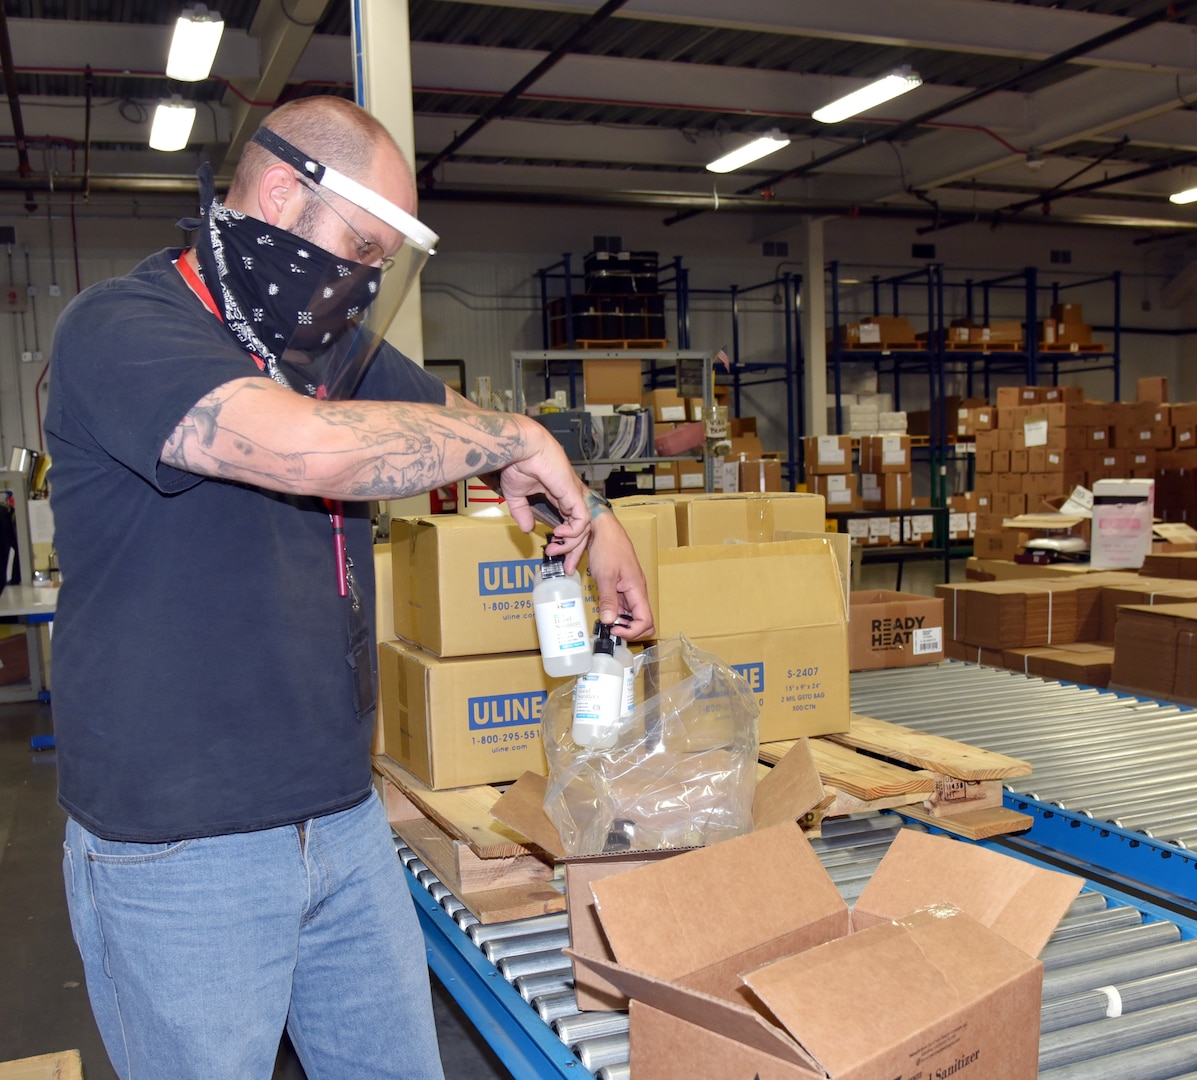 Male worker wearing face mask and face shield packs bottles into bags and boxes on a convey belt.